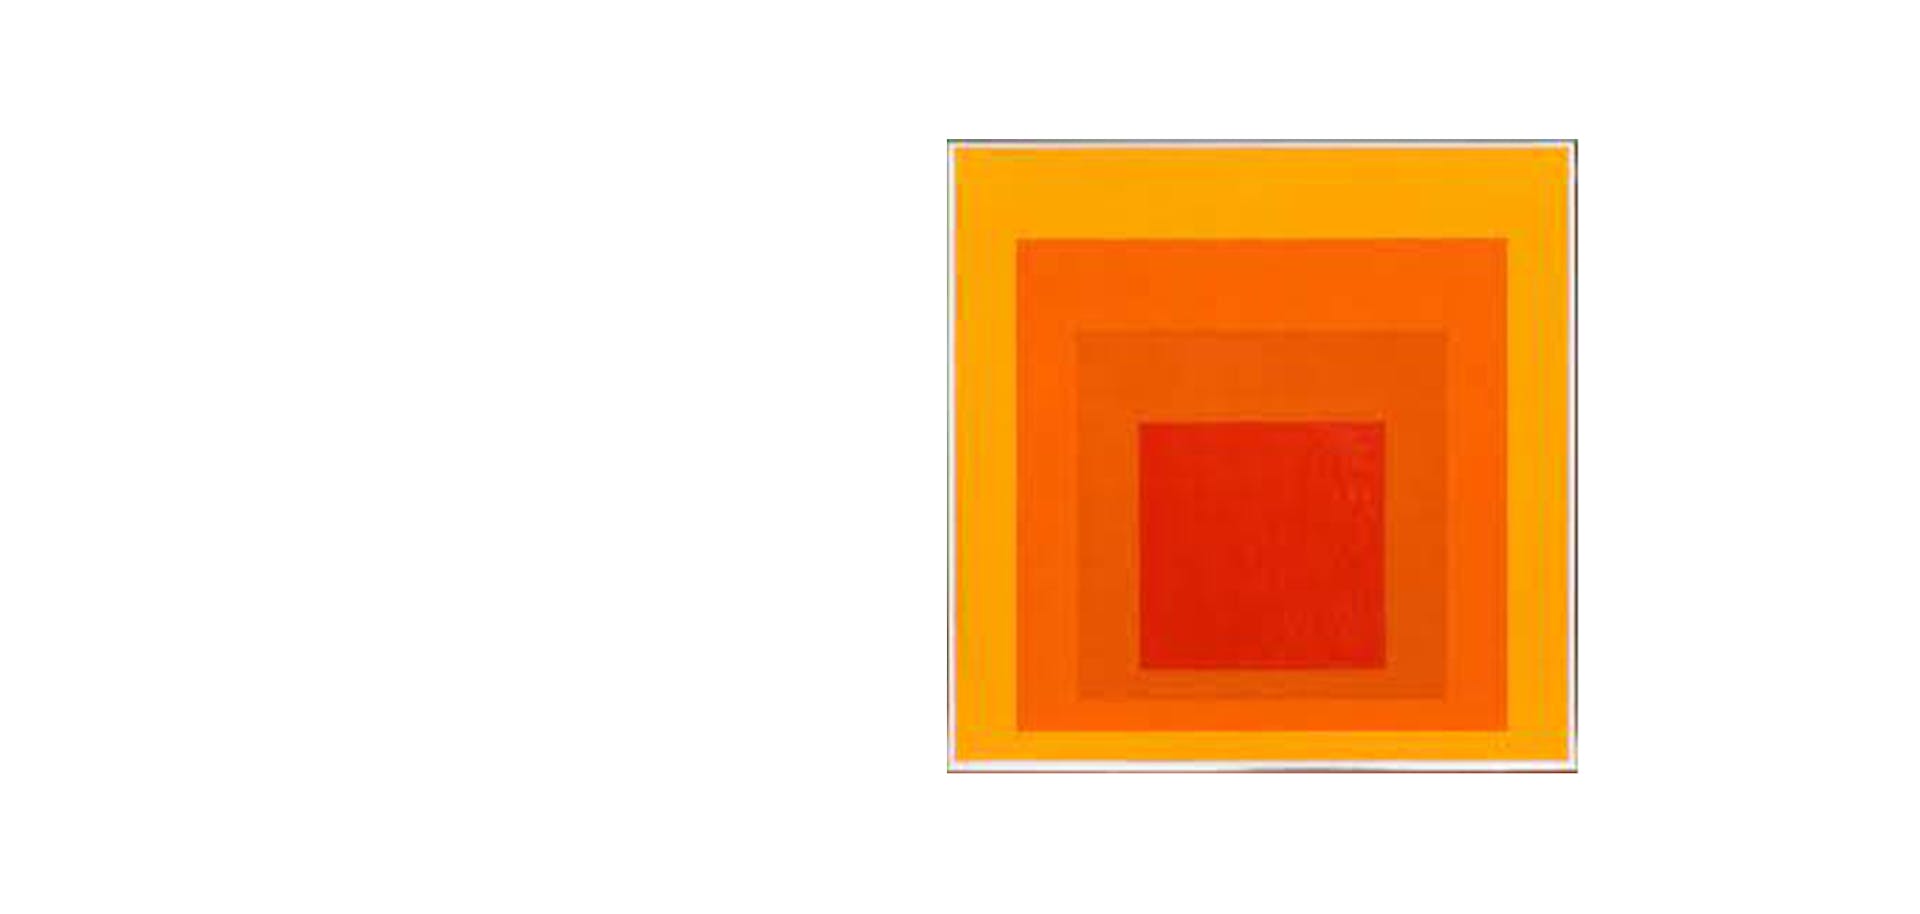 An art piece of different colored squares